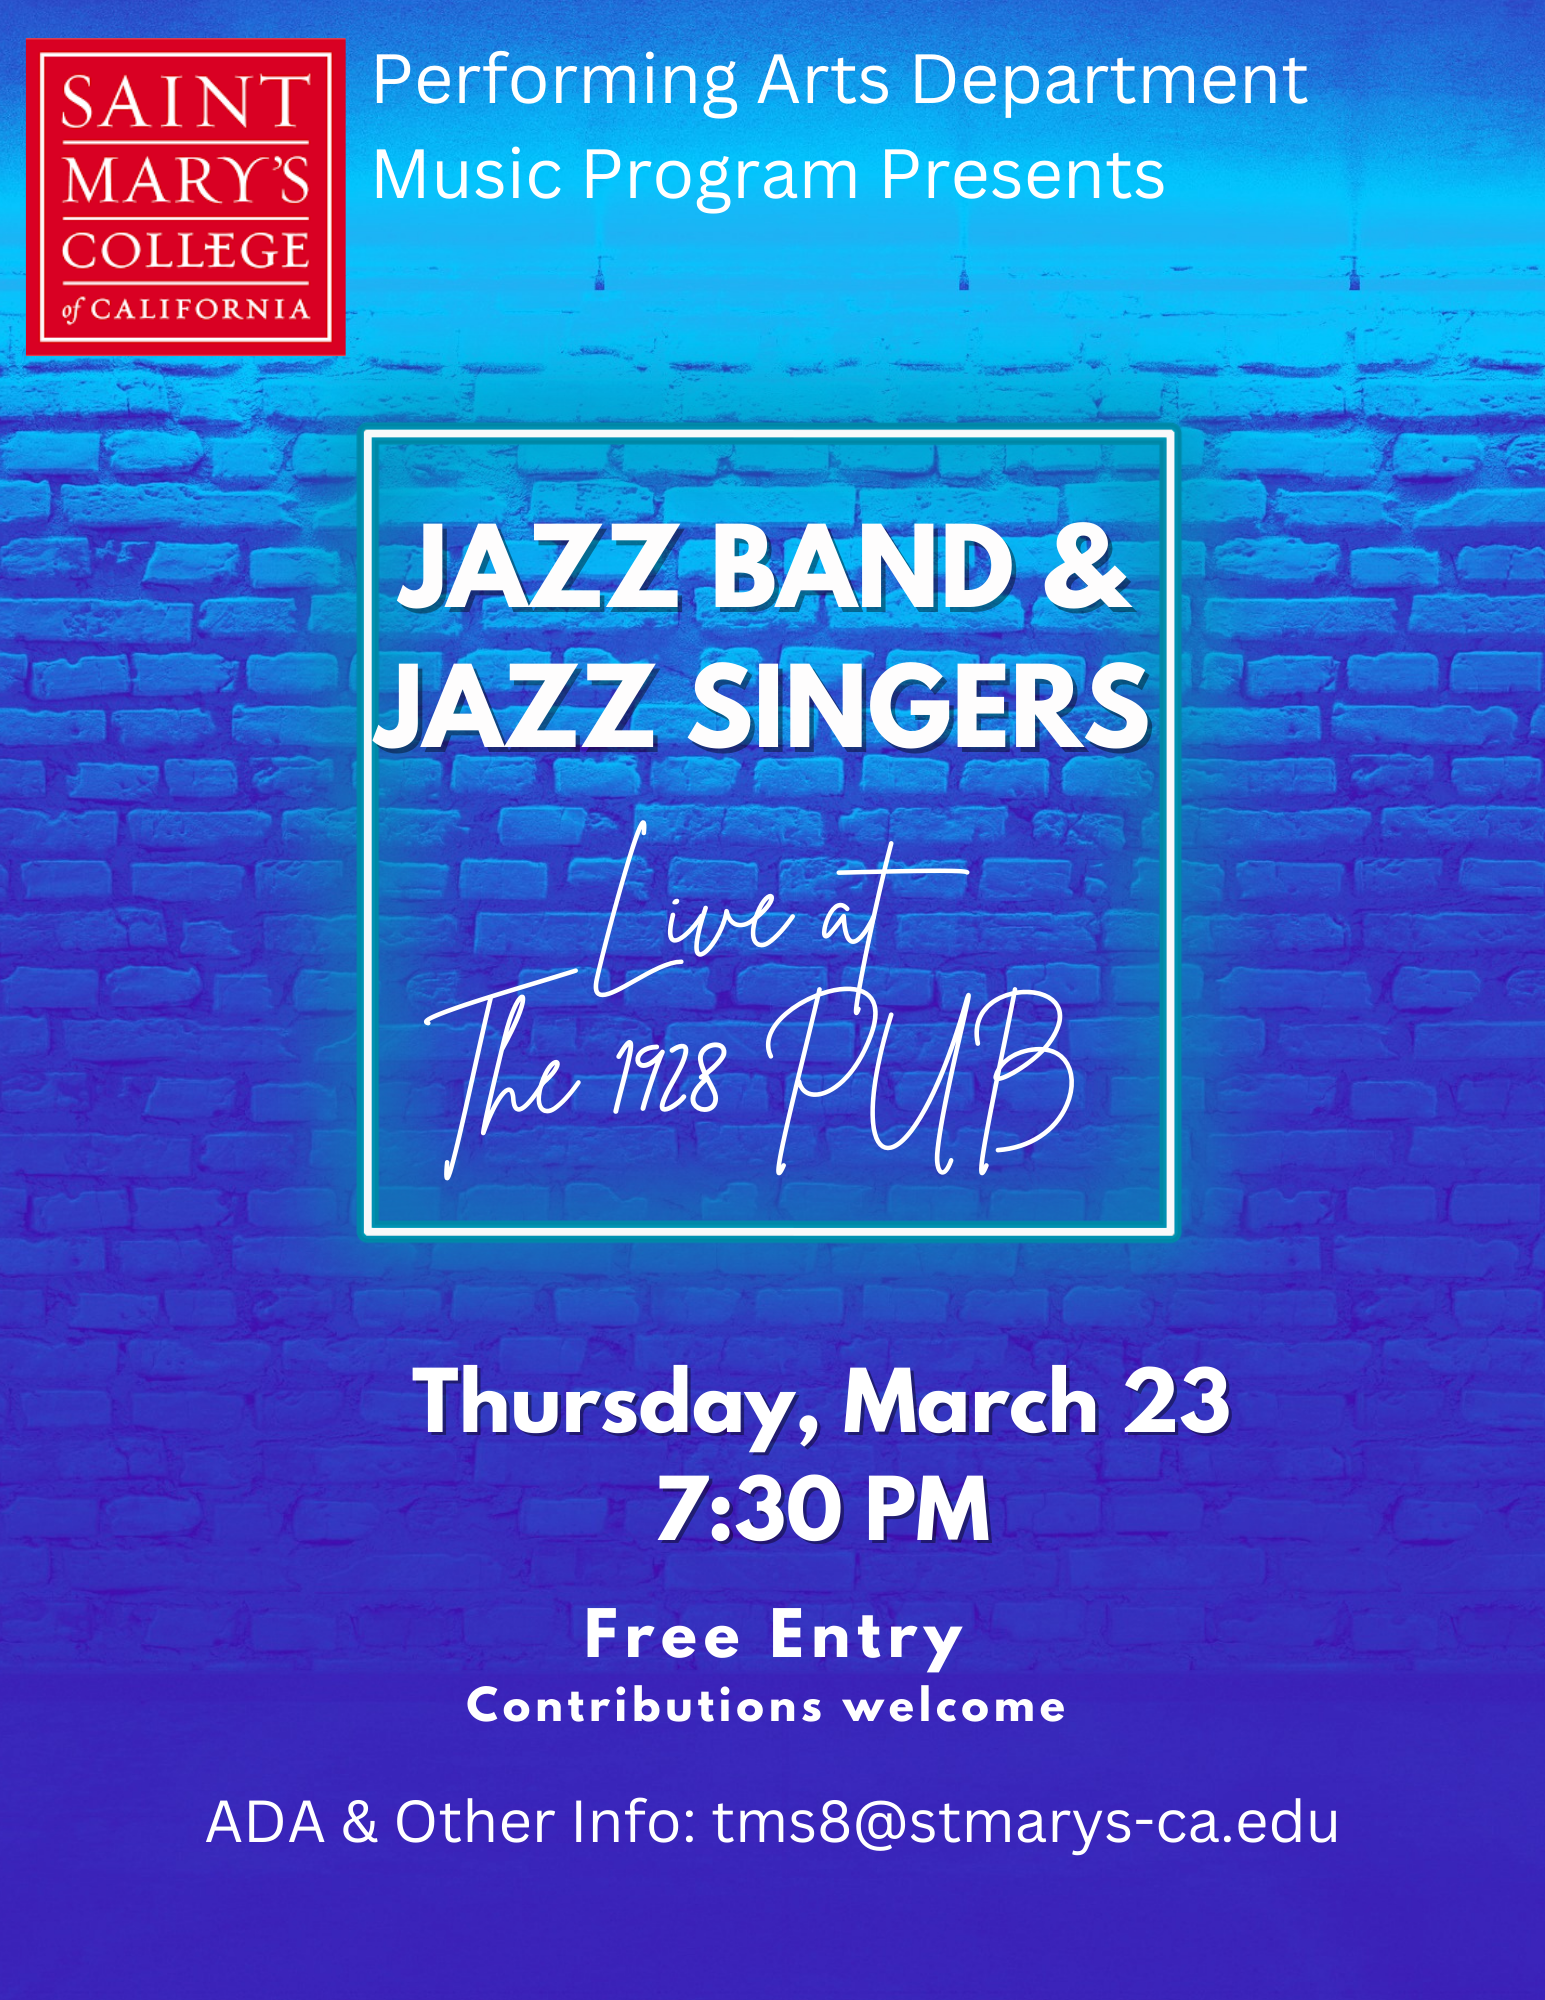 Blue Flyer with information for Jazz Band and Jazz Singers concert on March 23 at 7:30 in The Pub